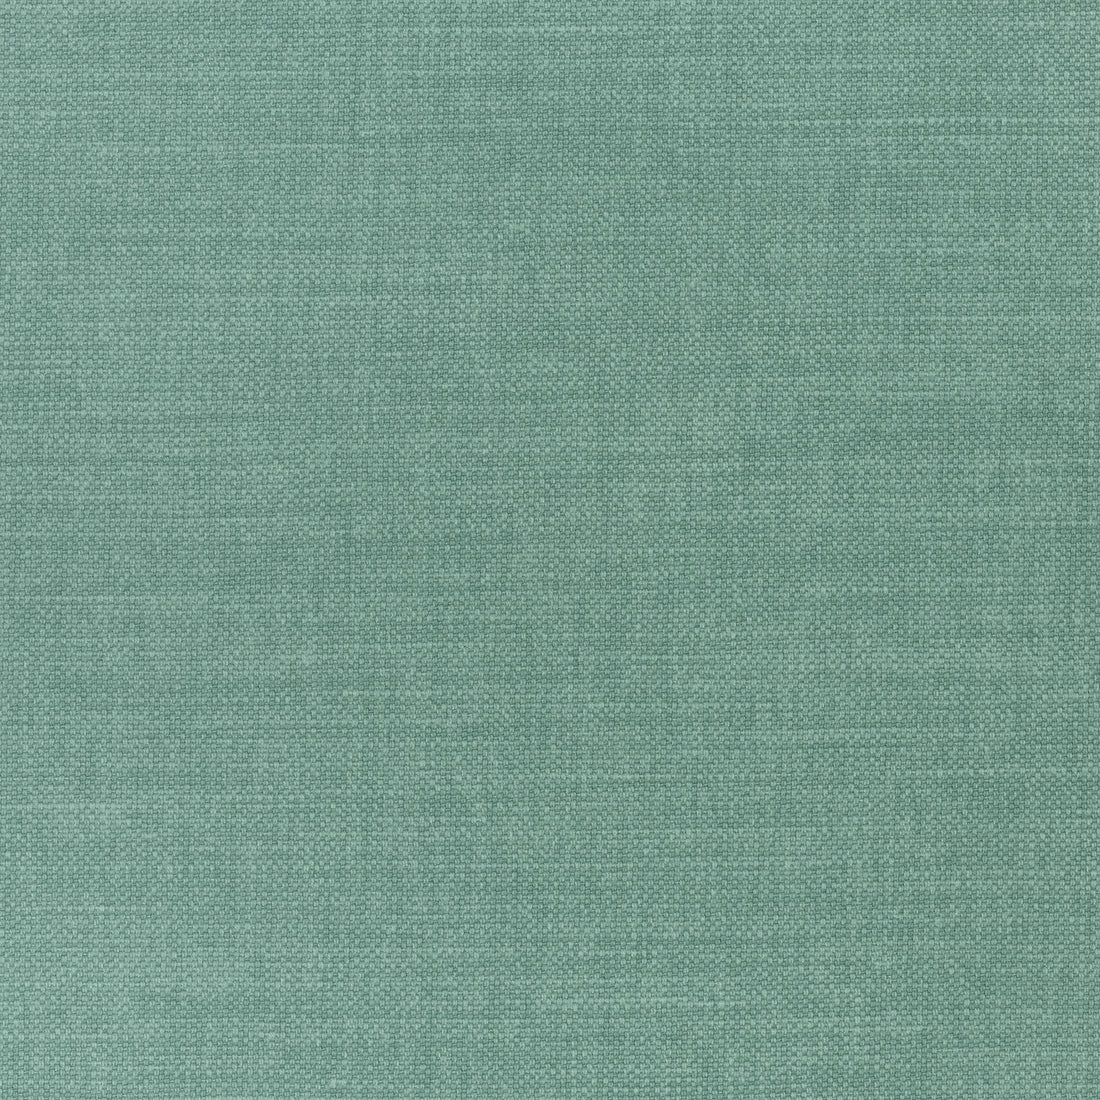 Prisma fabric in teal color - pattern number W70145 - by Thibaut in the Woven Resource Vol 12 Prisma Fabrics collection